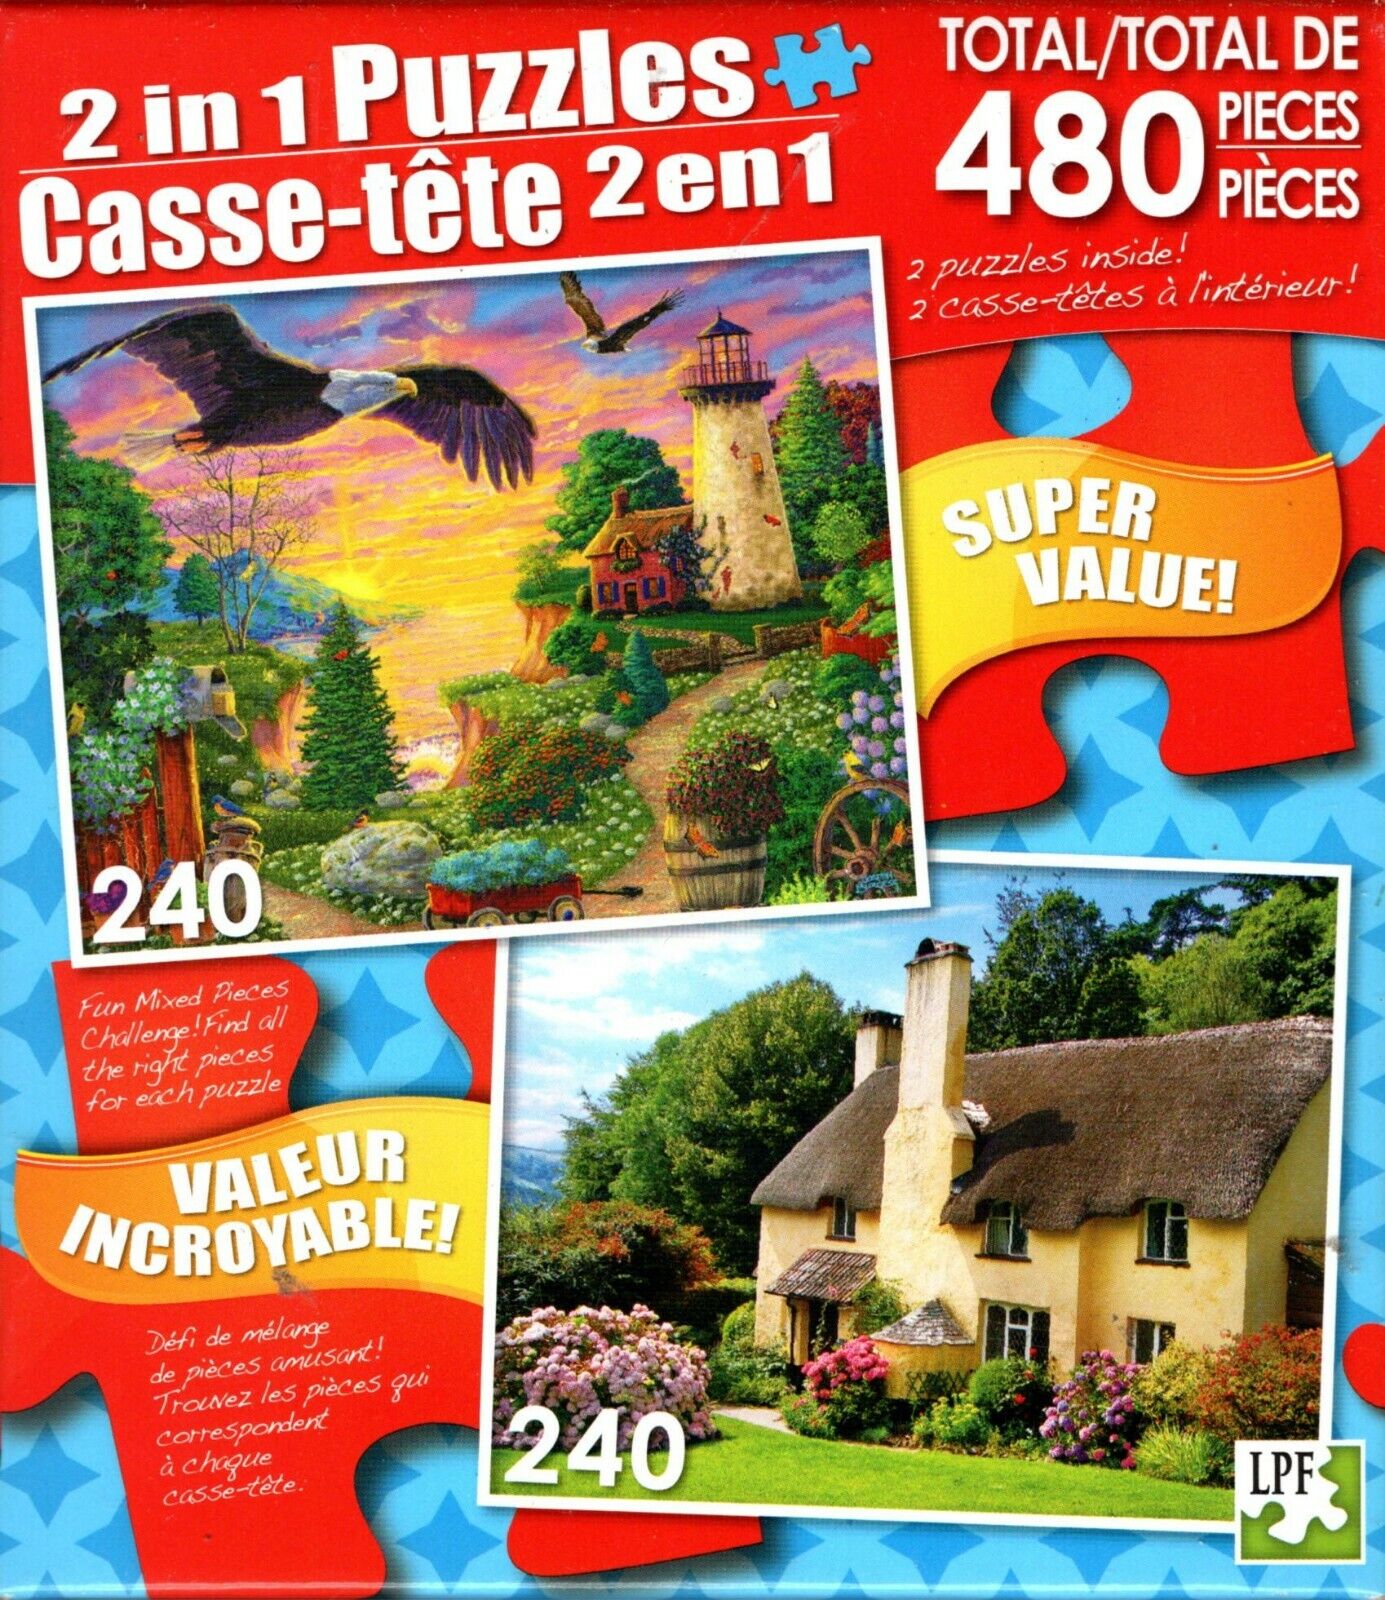 Golden Glory / English Thatched Roof Cottage - Total 480 Piece 2 in 1 Puzzles